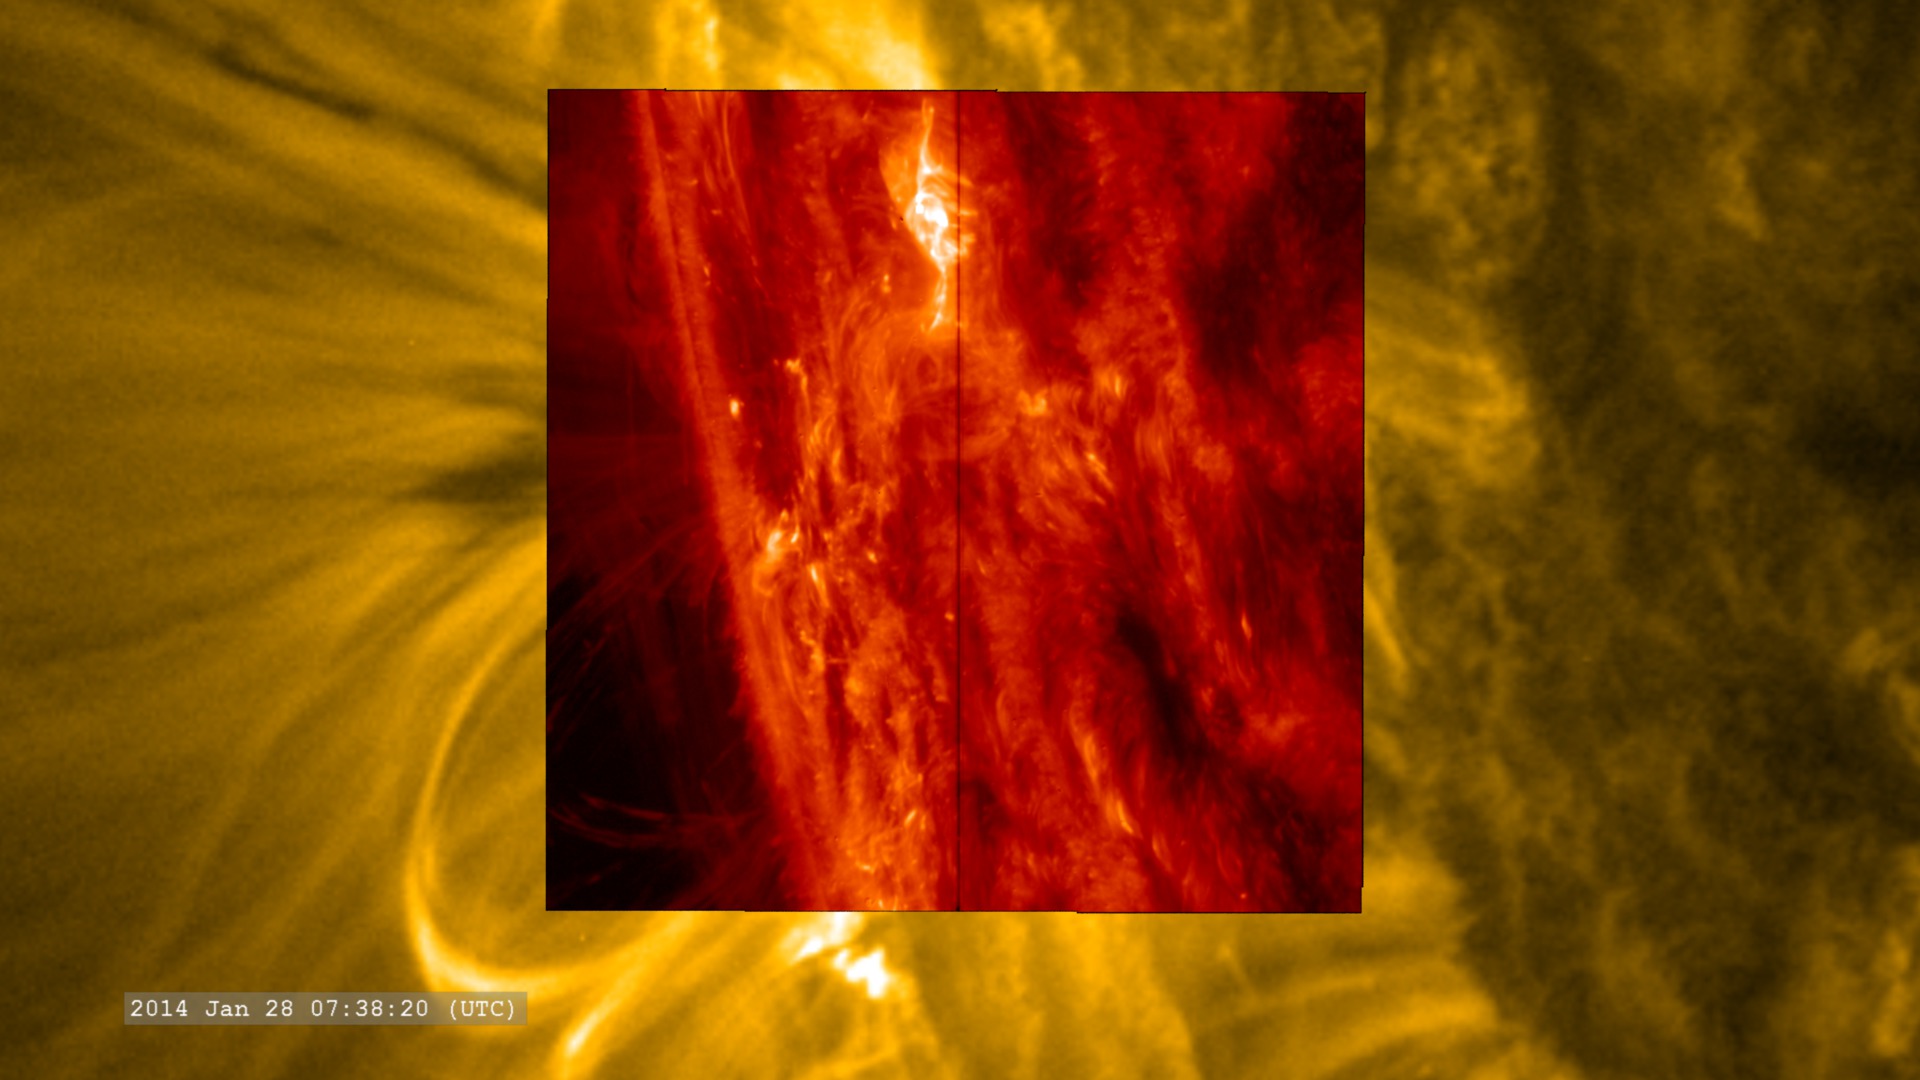 Preview Image for IRIS close-up of a solar flare